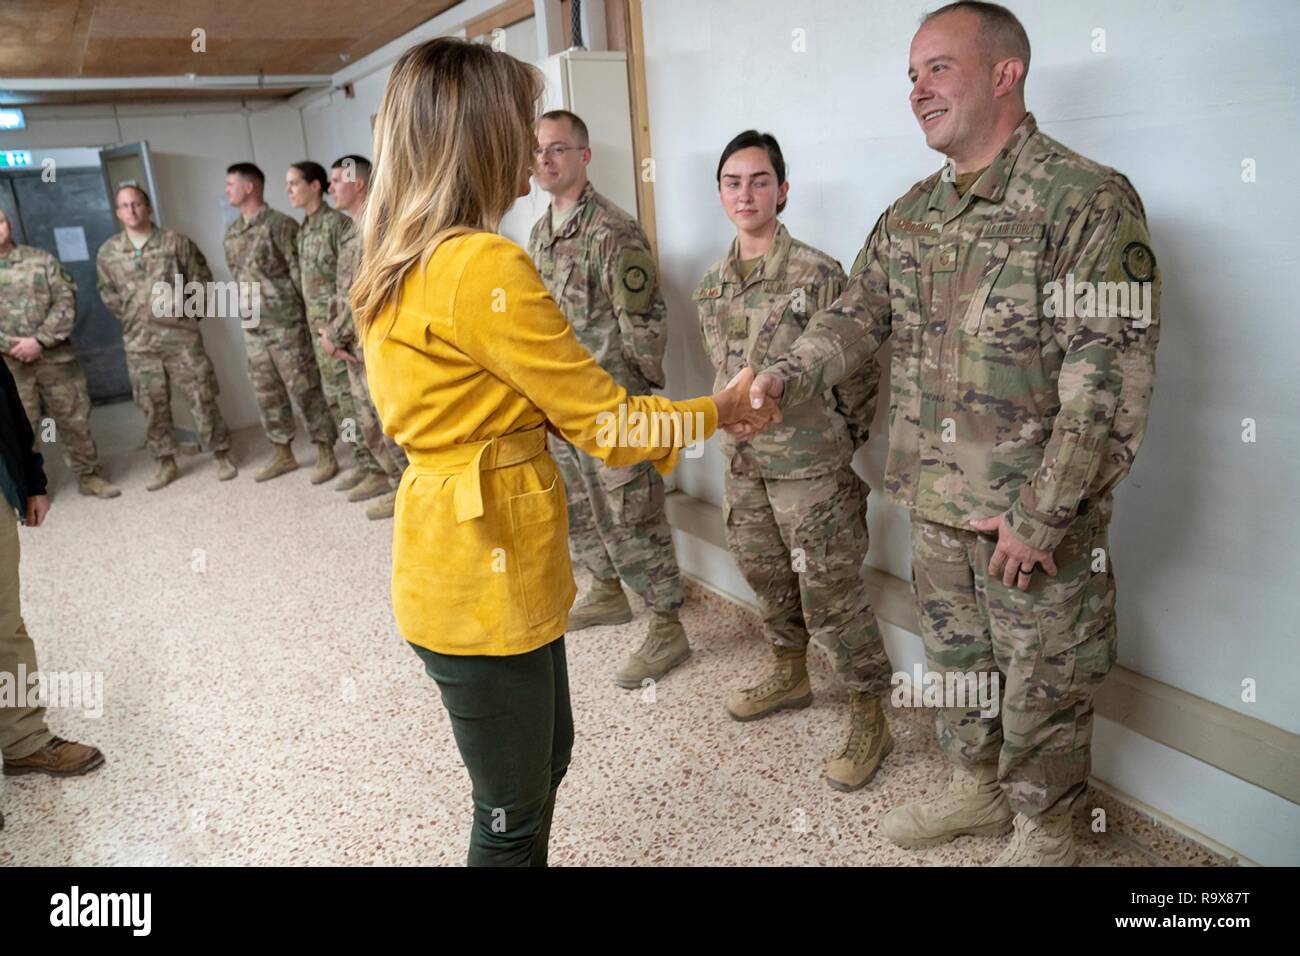 U.S. First Lady Melania Trump greets U.S. service members during a surprise visit to Al Asad Air Base December 26, 2018 in Al Anbar, Iraq. The president and the first lady spent about three hours on Boxing Day at Al Asad, located in western Iraq, their first trip to visit troops overseas since taking office. Stock Photo